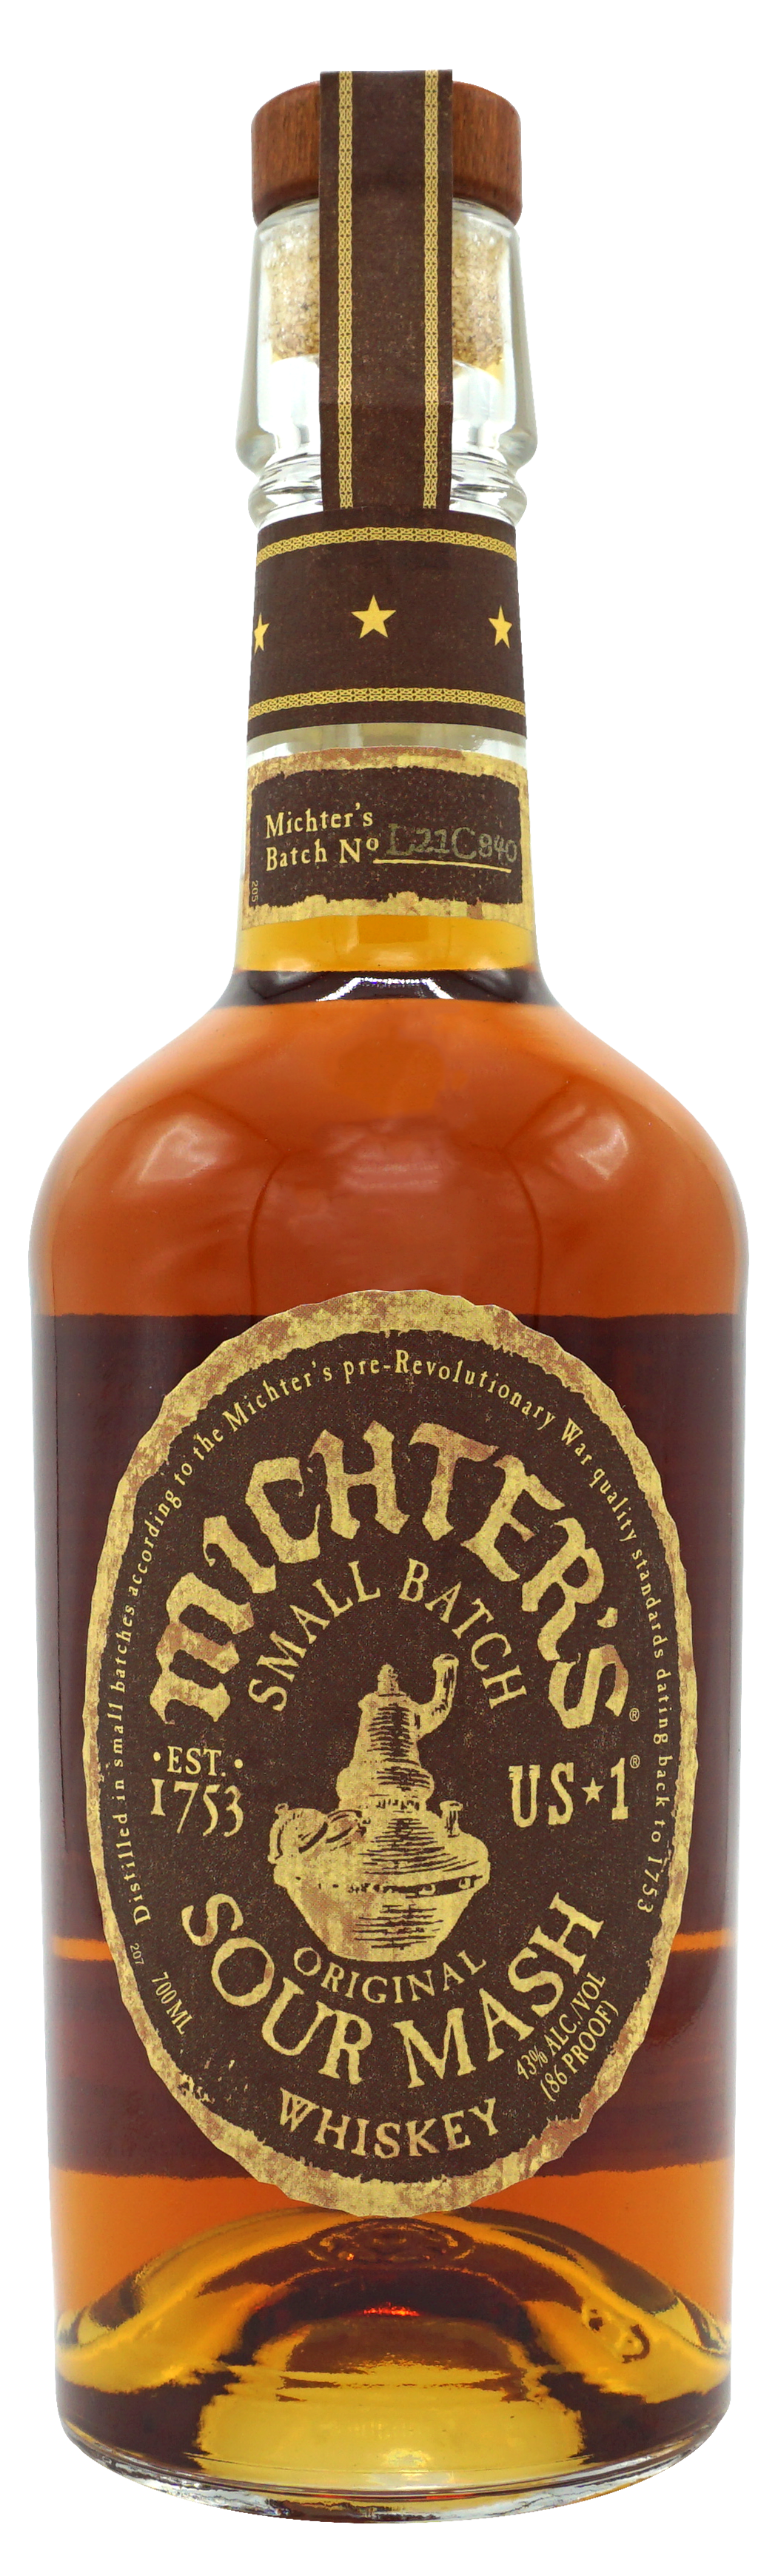 Michters Sour Mash Whiskey 43